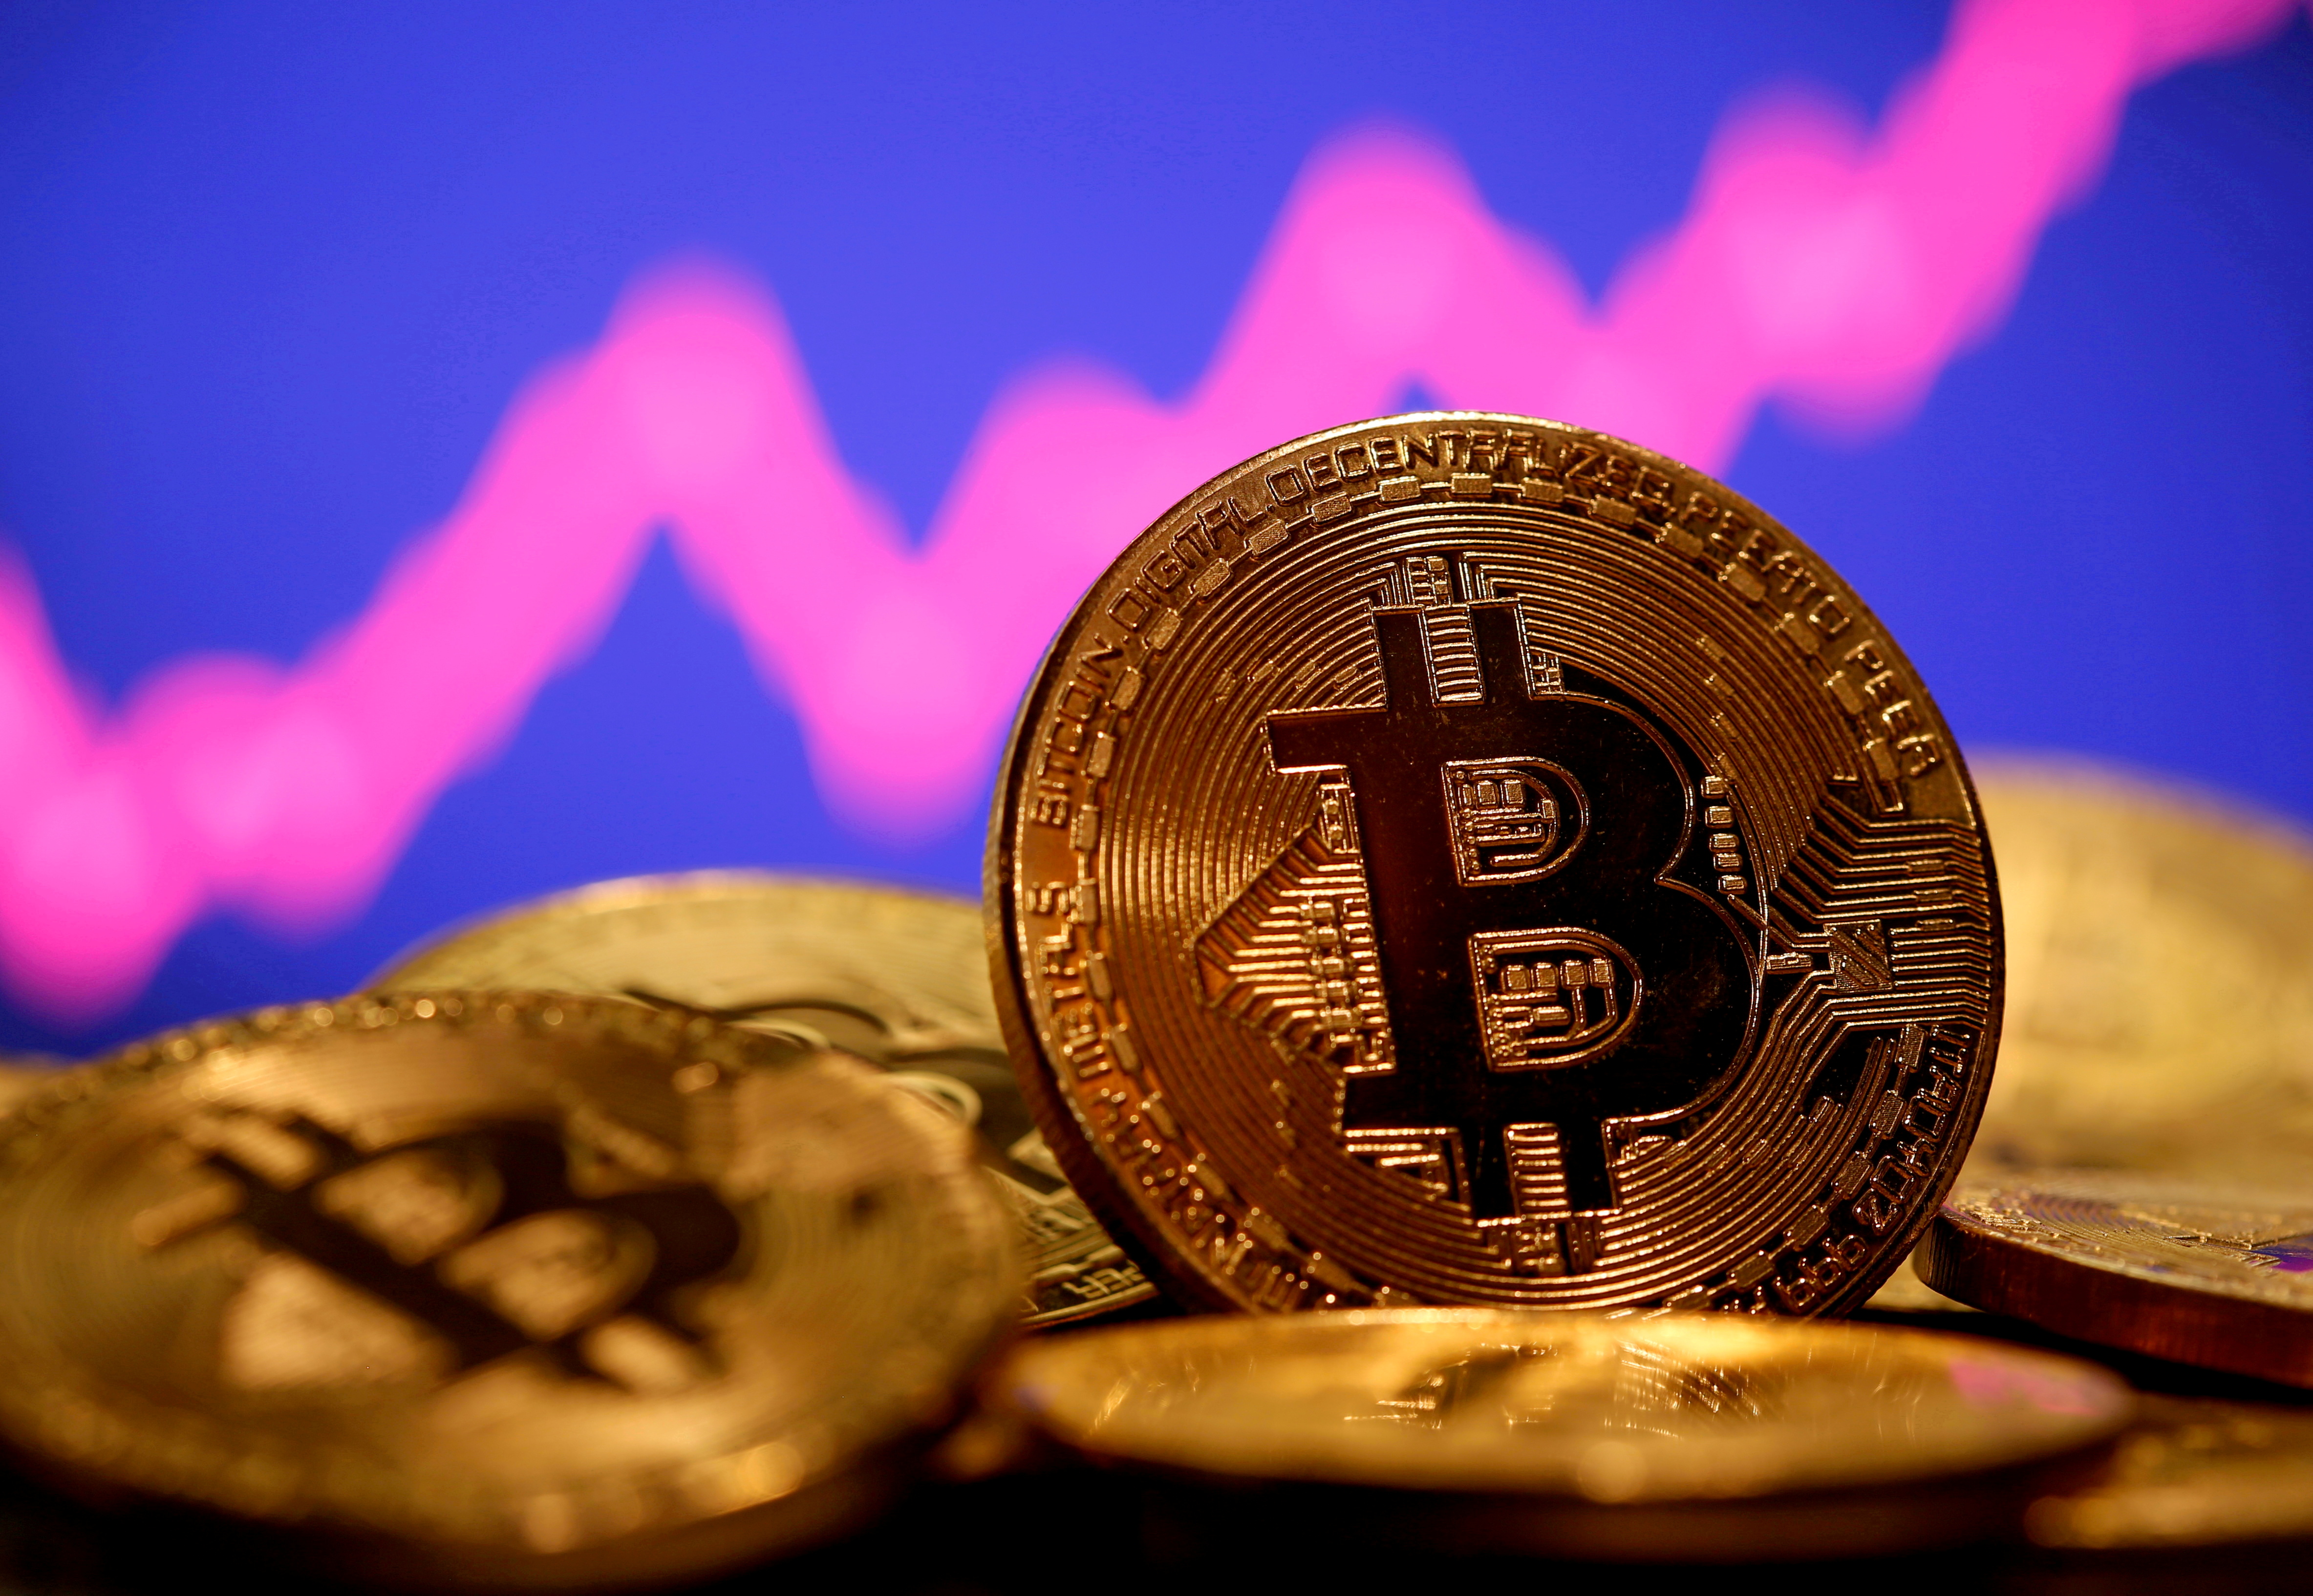 A representation of virtual currency Bitcoin is seen in front of a stock graph in this illustration taken January 8, 2021. REUTERS/Dado Ruvic